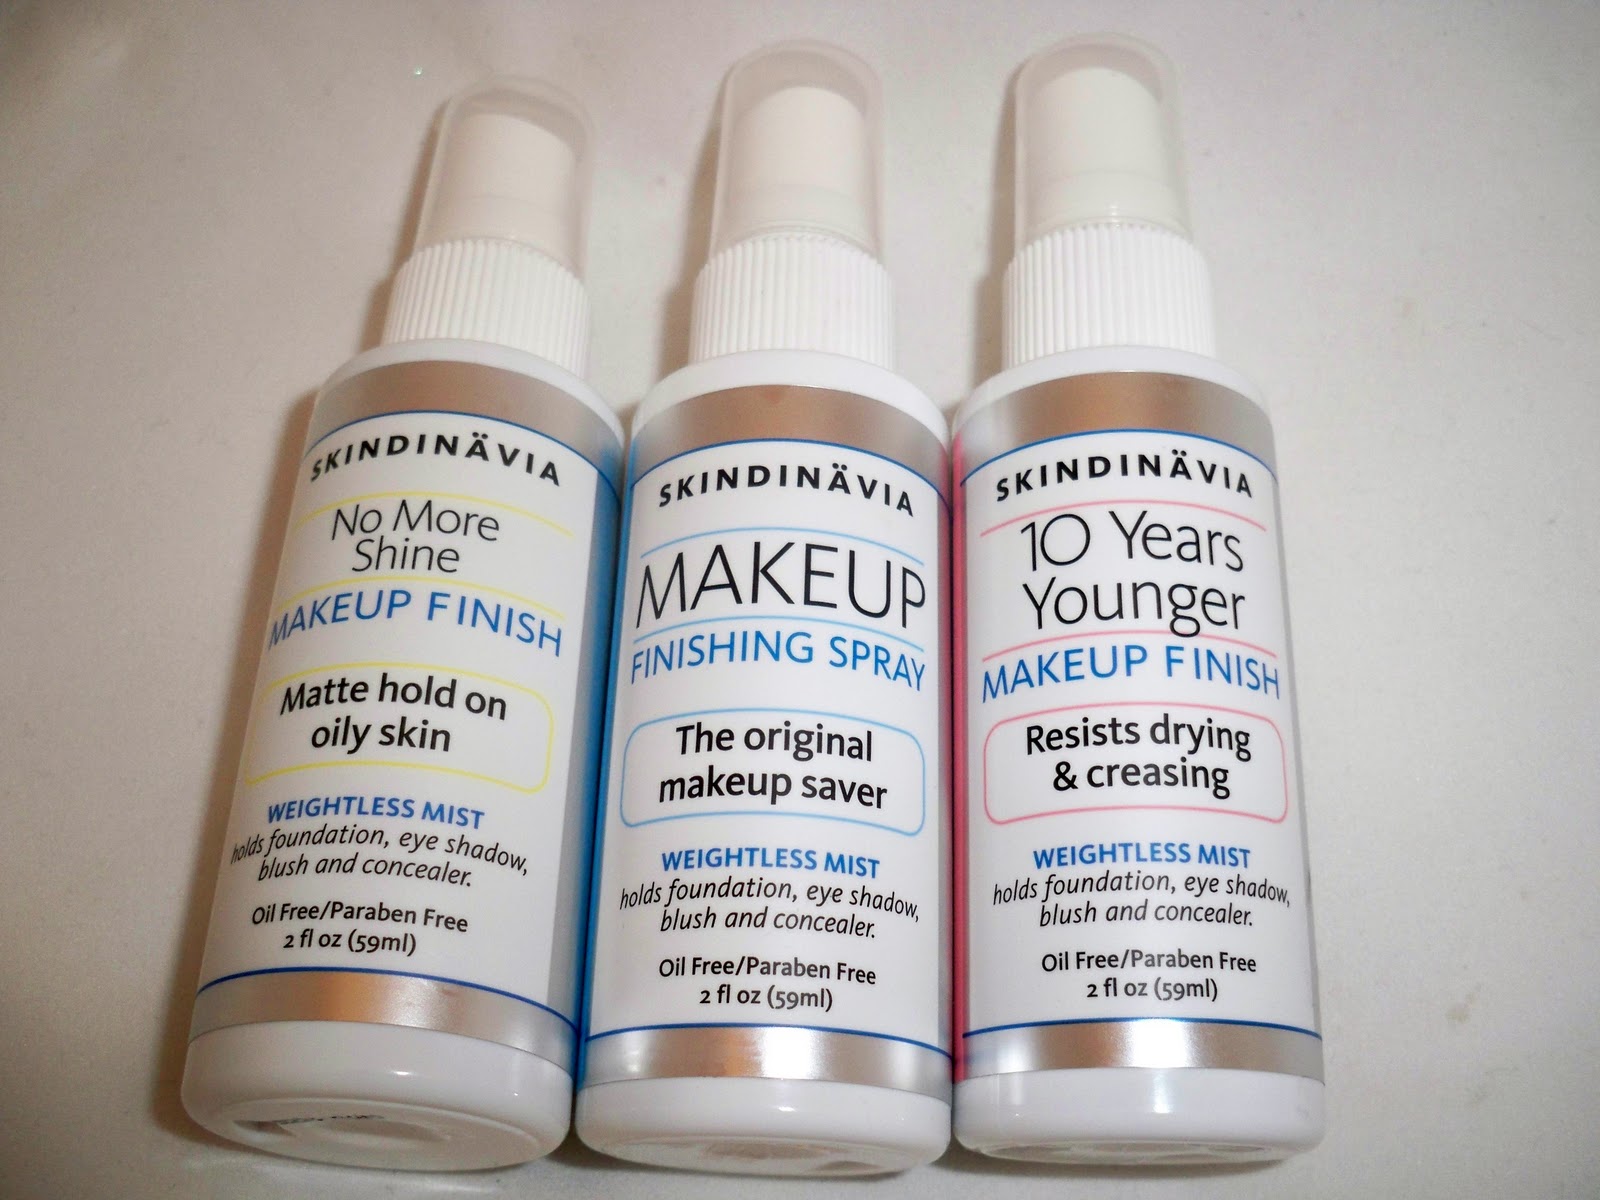 Finish Sprays - Review & Giveaway! | Makeup By RenRen